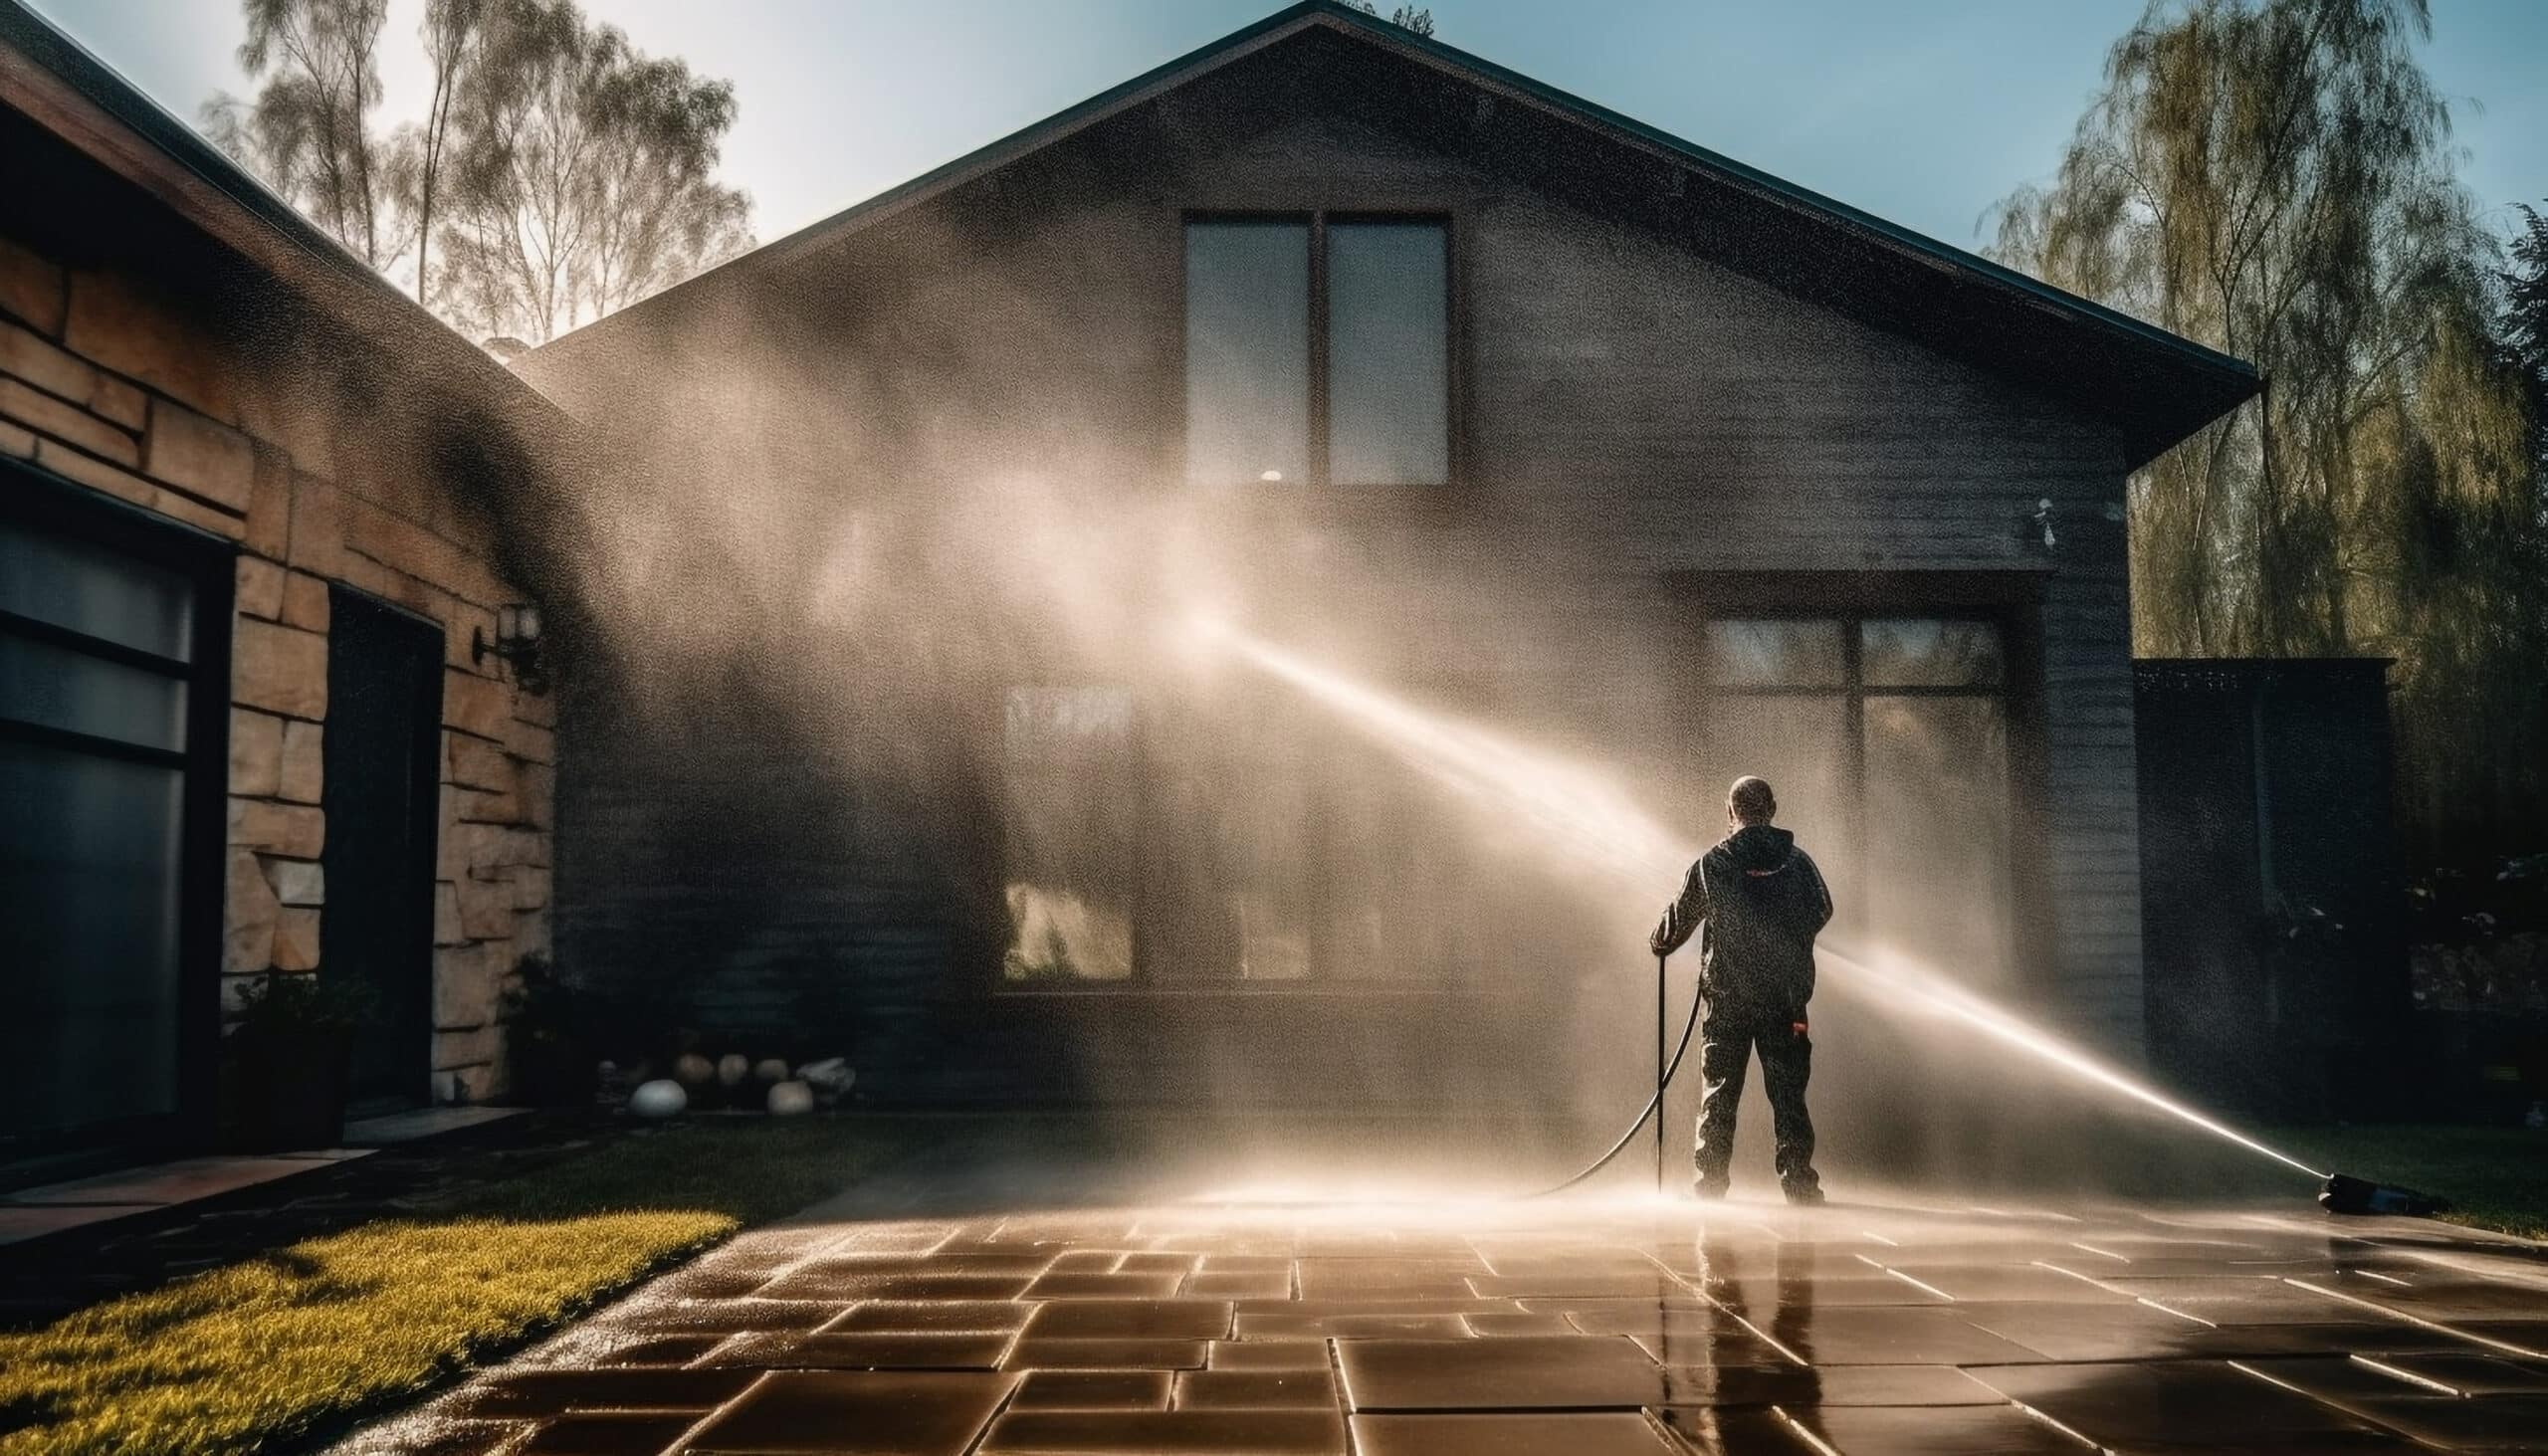 www.appr.com : How do electric pressure washers work?